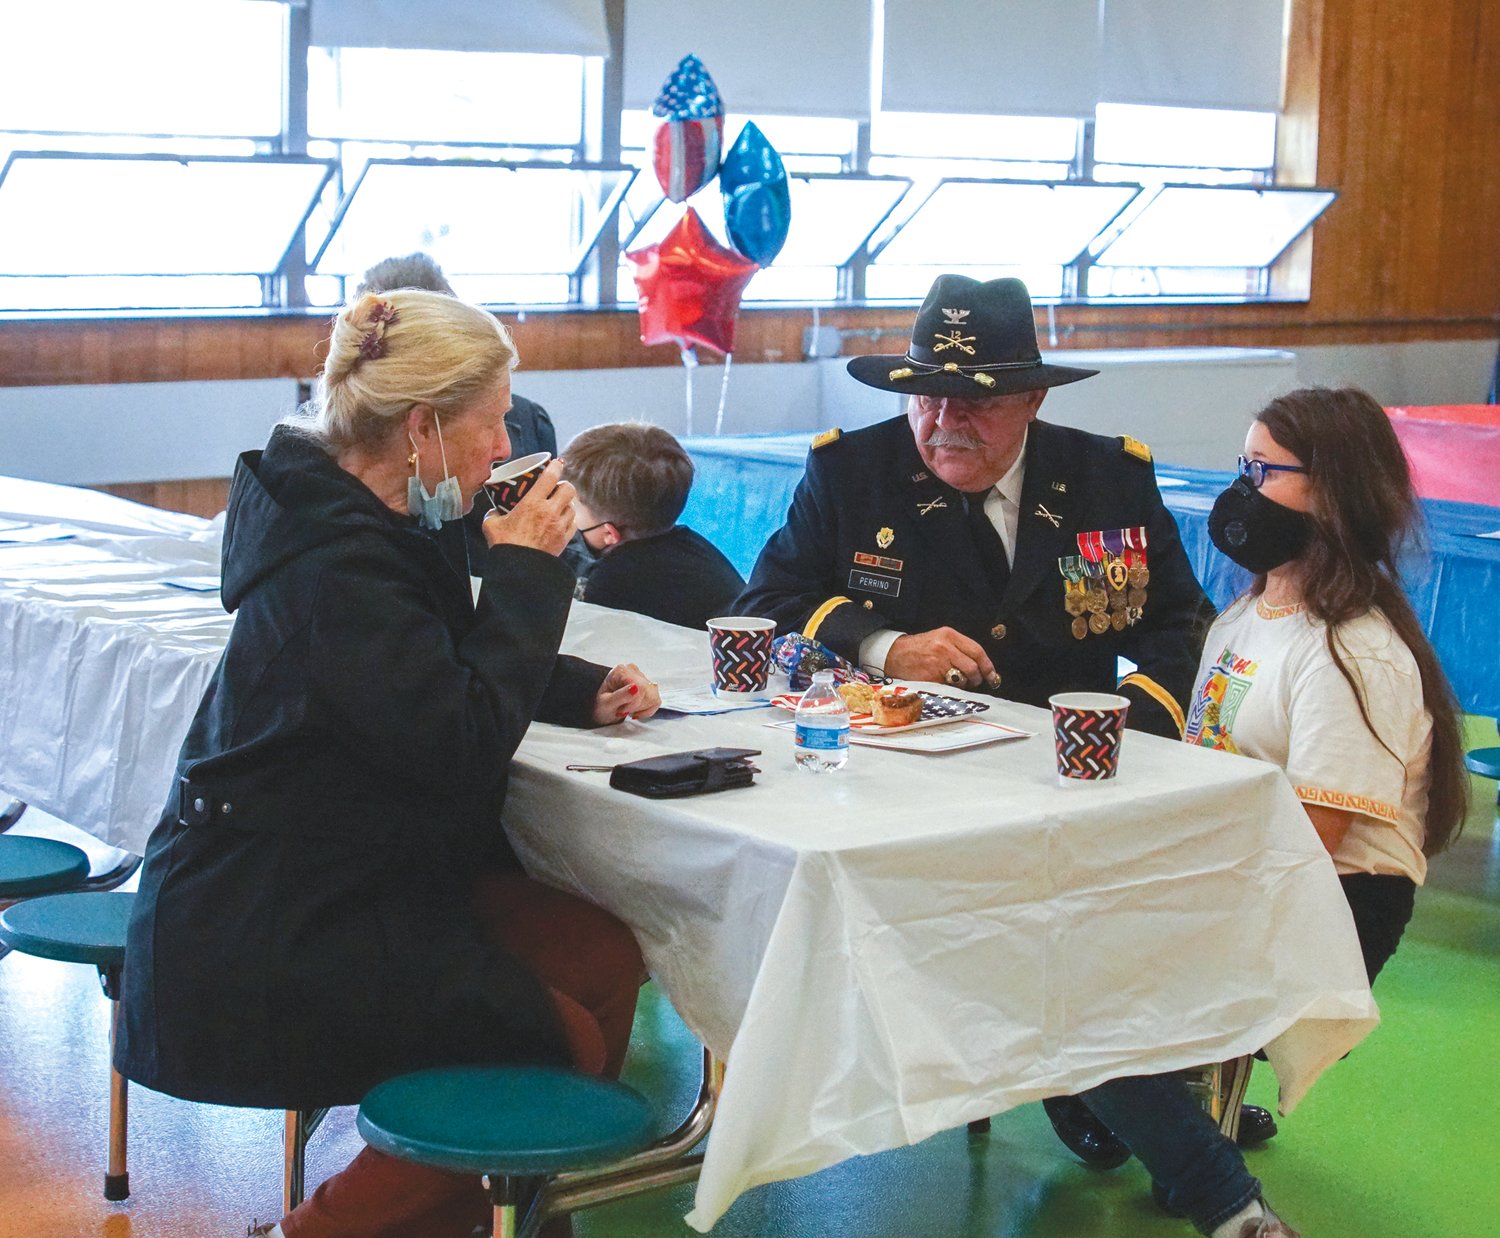 SHARING: Retired Army Colonel Dennis Perrino shares a
drink and snack with his granddaughter, Glen Hills 4th grader
Ramona Perrino, on November 10 during the school's Veteran's
Day Celebration.